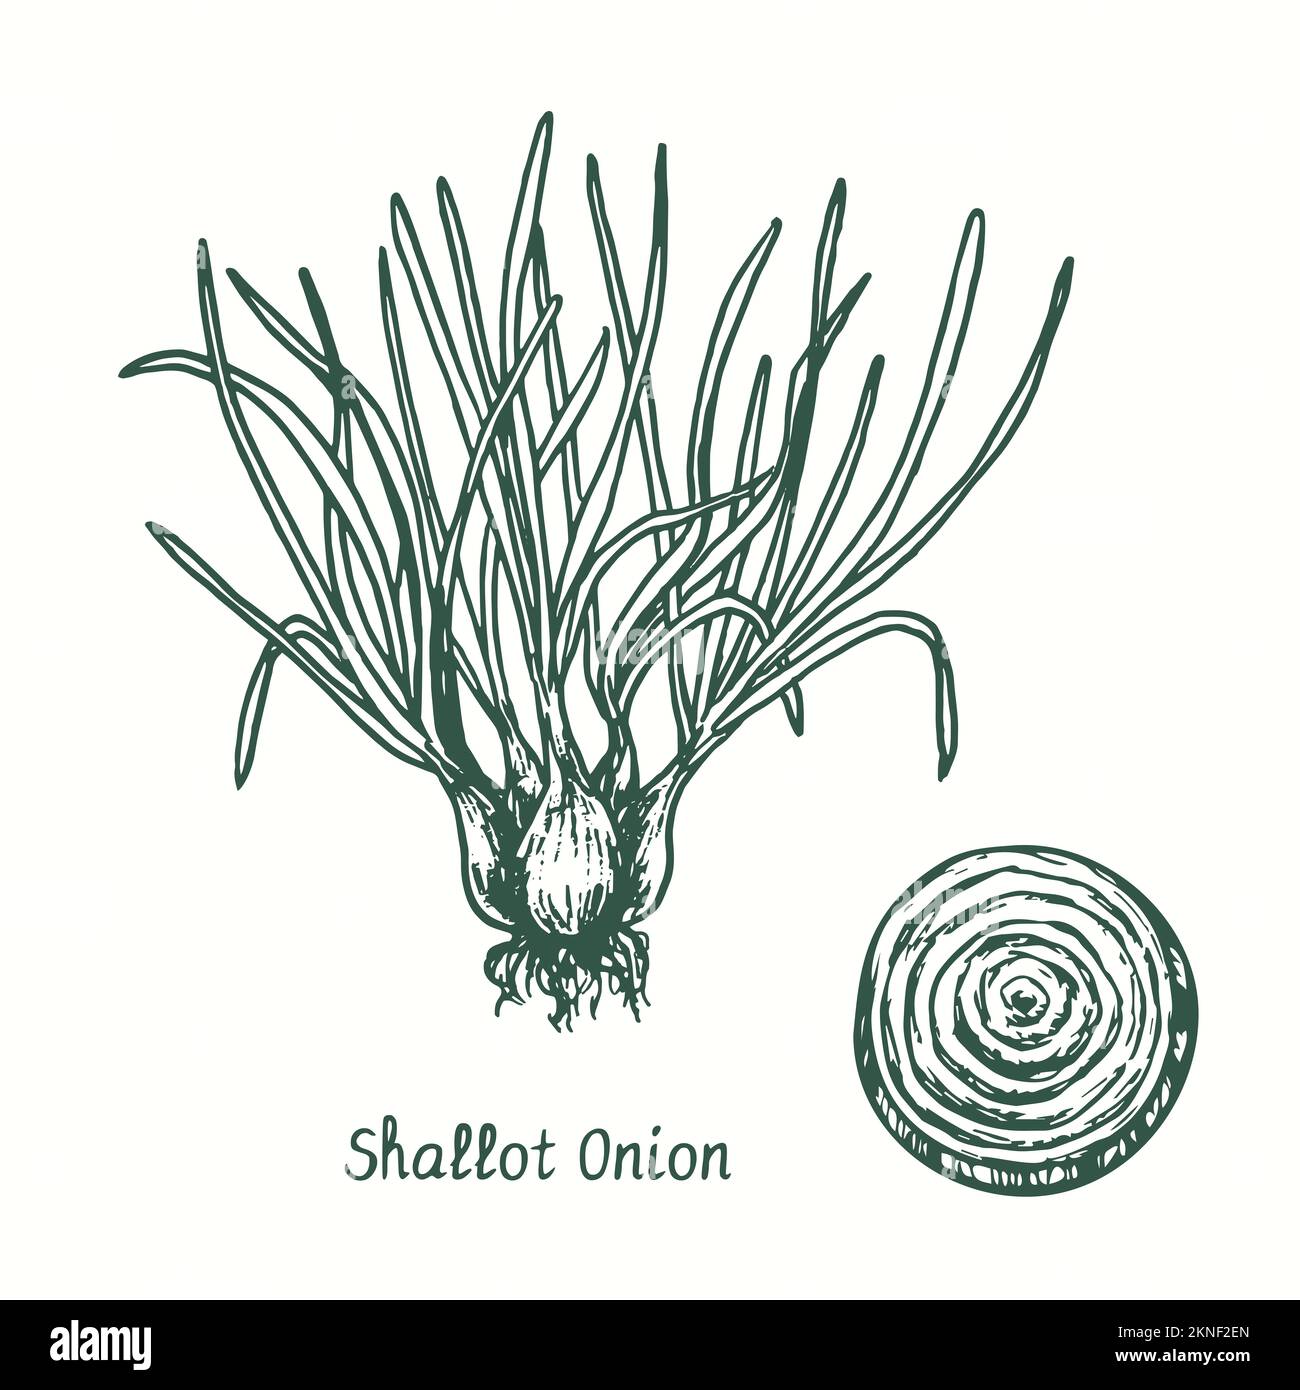 Shallot onion  plant and cut slice.  Ink black and white doodle drawing in woodcut style Stock Photo